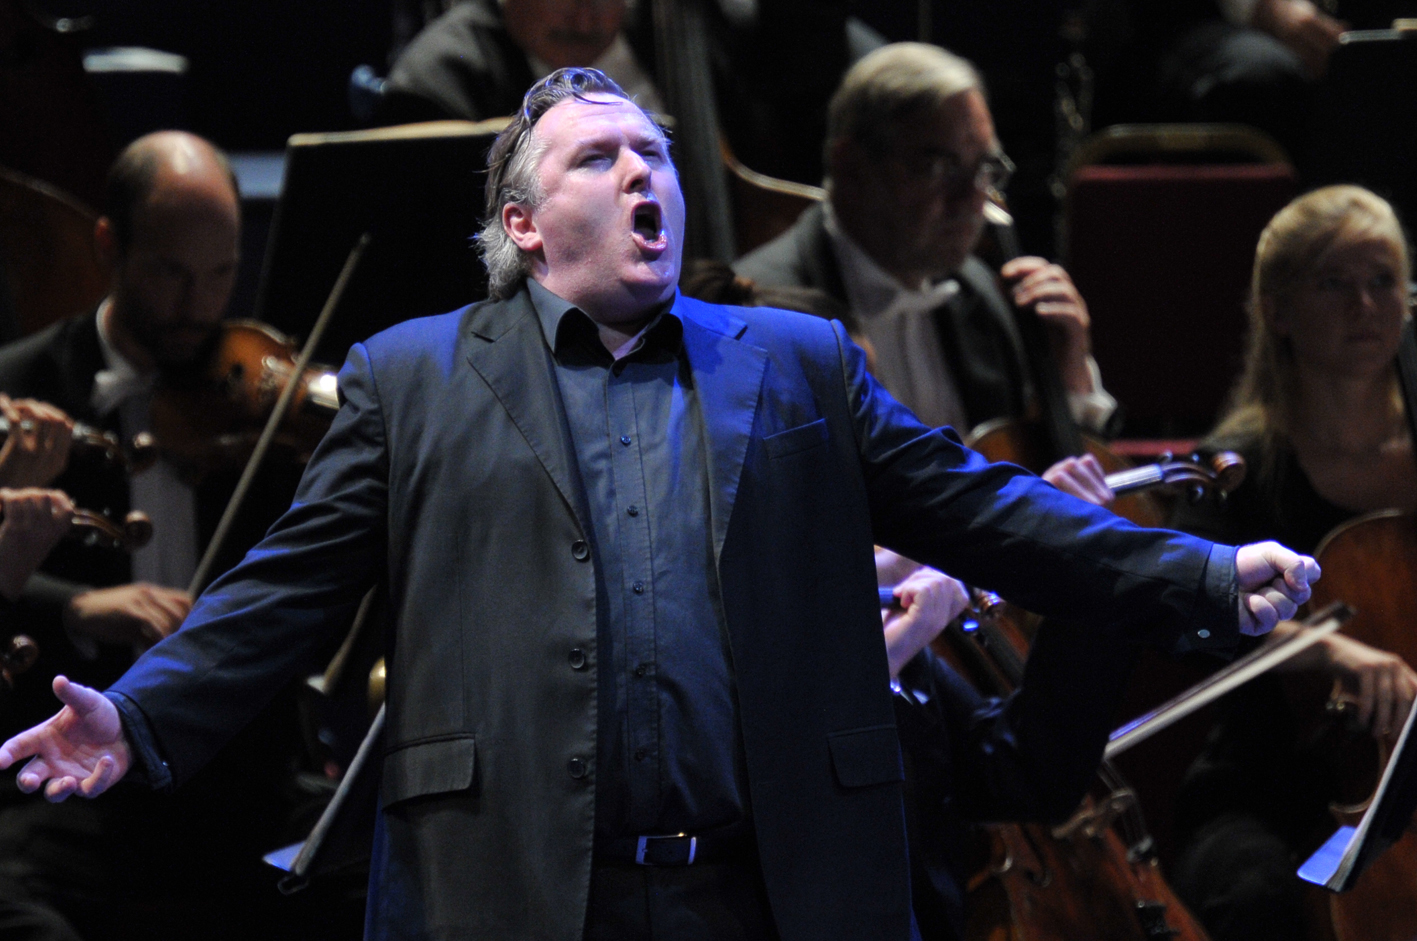 Simon O'Neill at the 2013 Proms by Chris Christodoulou